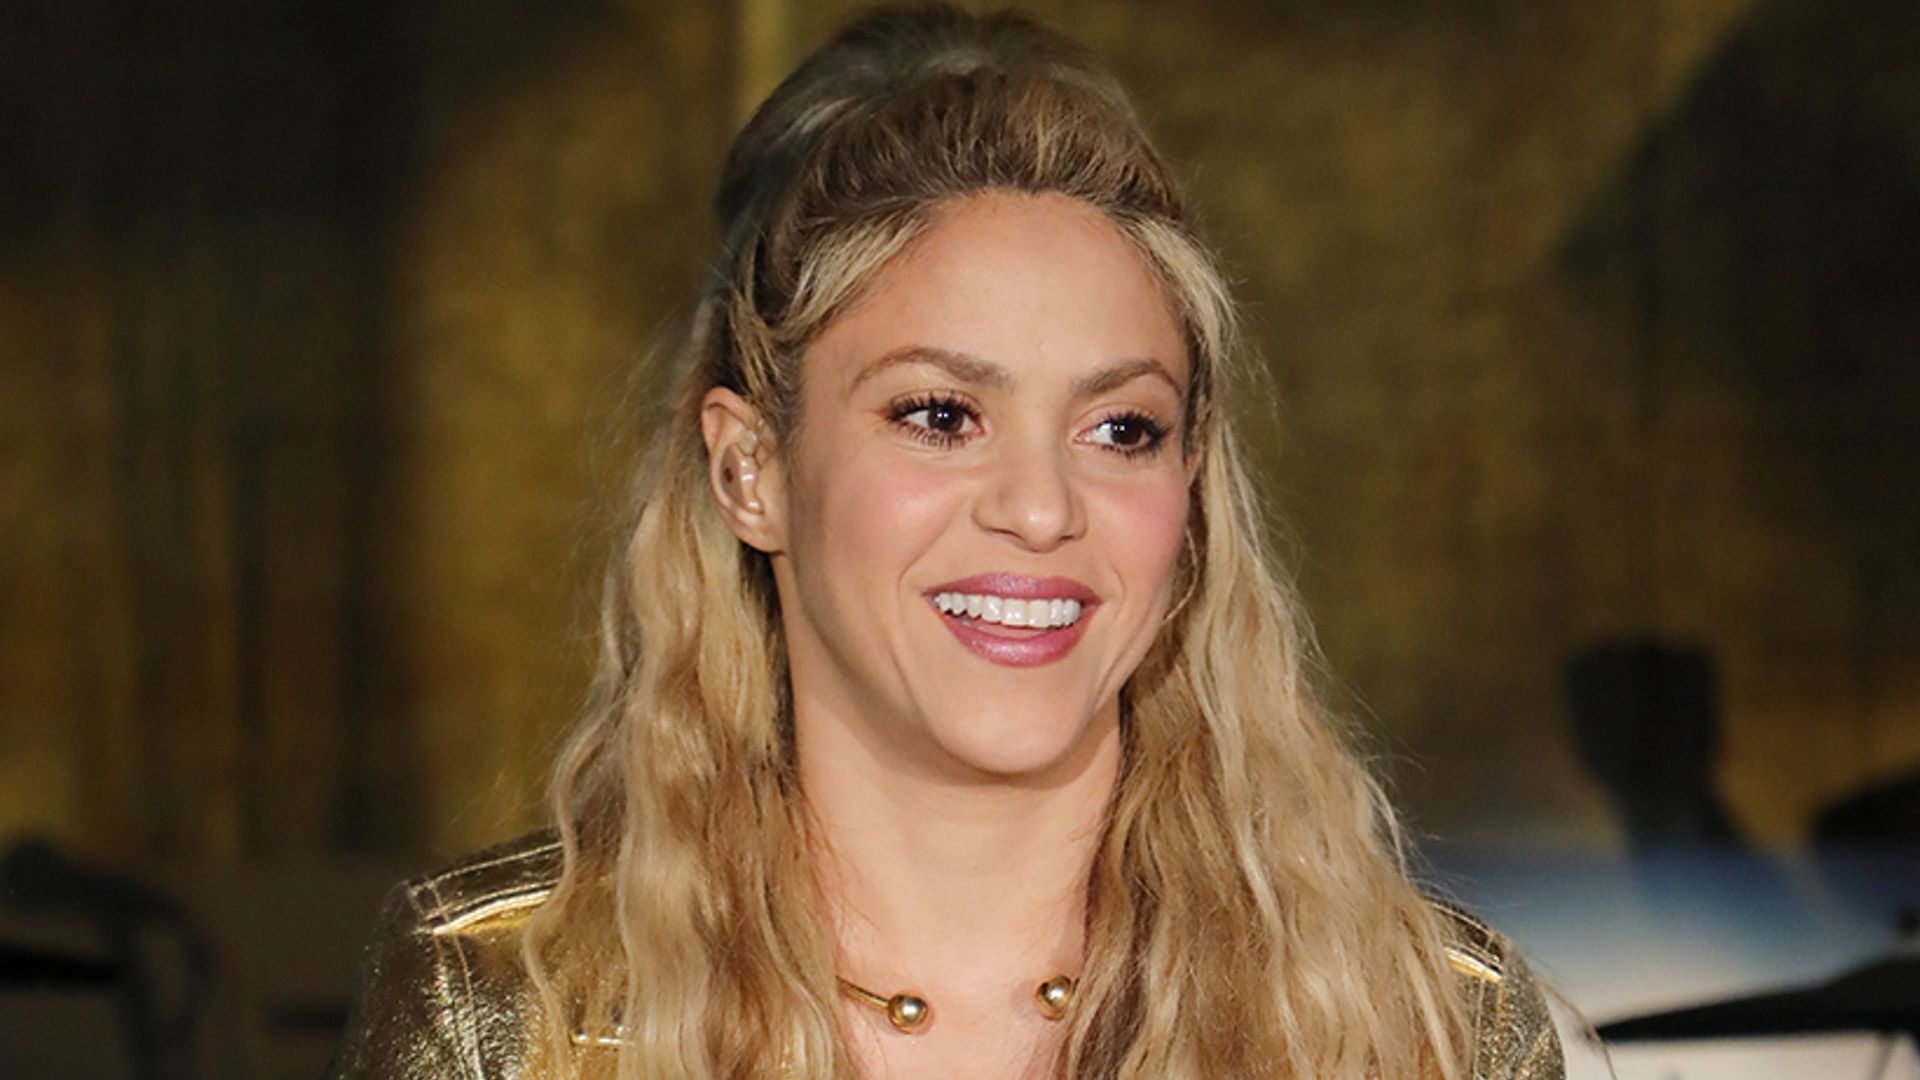 Shakira & Gisele Bundchen Hang Out Together in Miami, Grab Dinner With  Their Children – Are They New Friends? | Gisele Bundchen, Shakira | Just  Jared: Celebrity Gossip and Breaking Entertainment News